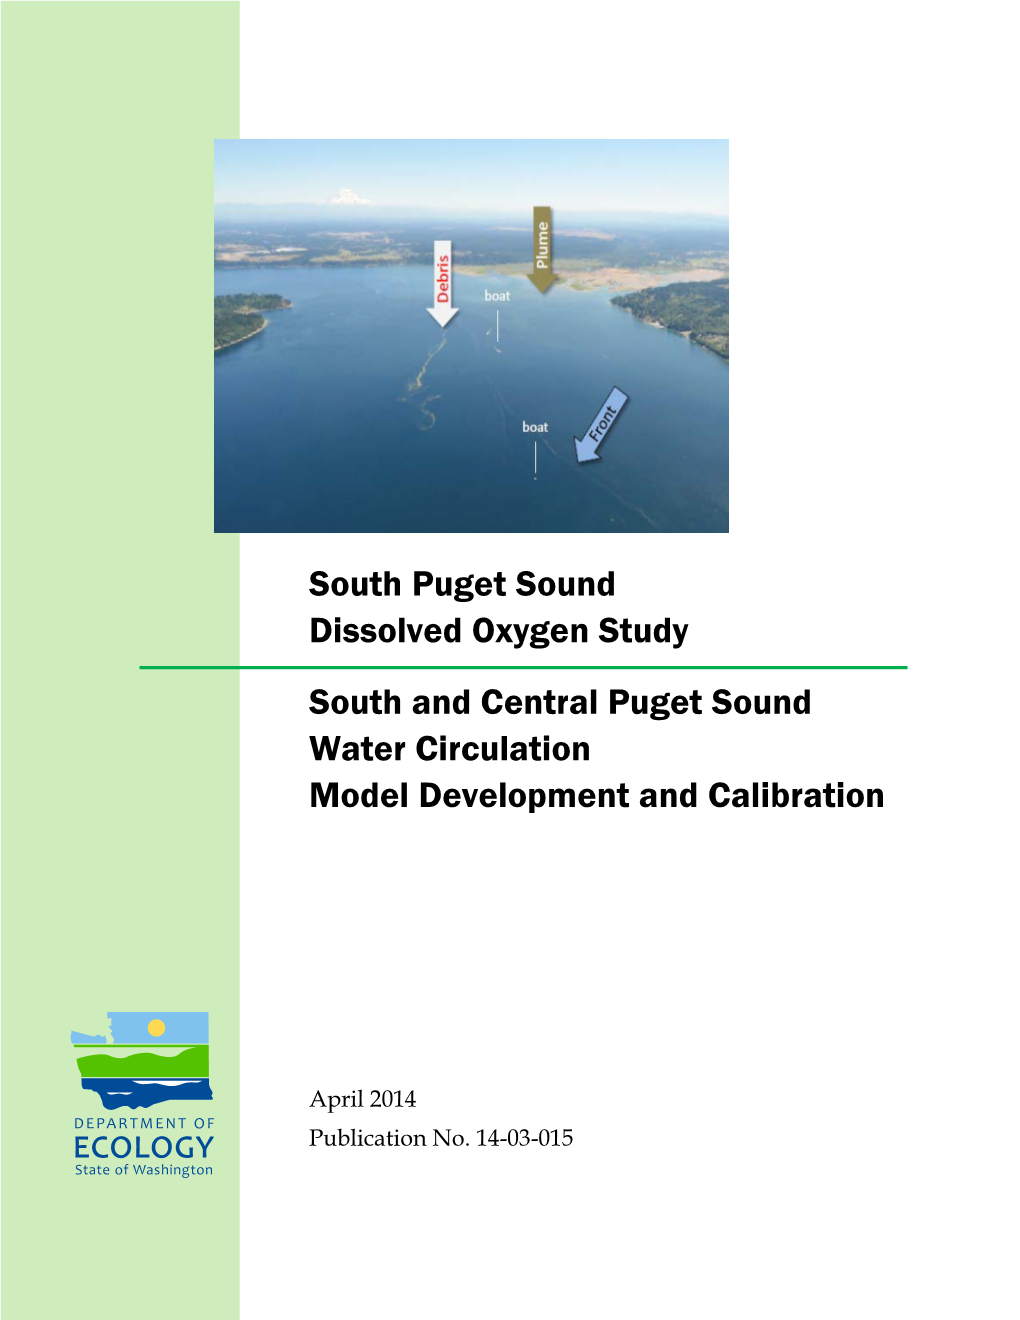 South Puget Sound Dissolved Oxygen Study South and Central Puget Sound Water Circulation Model Development and Calibration